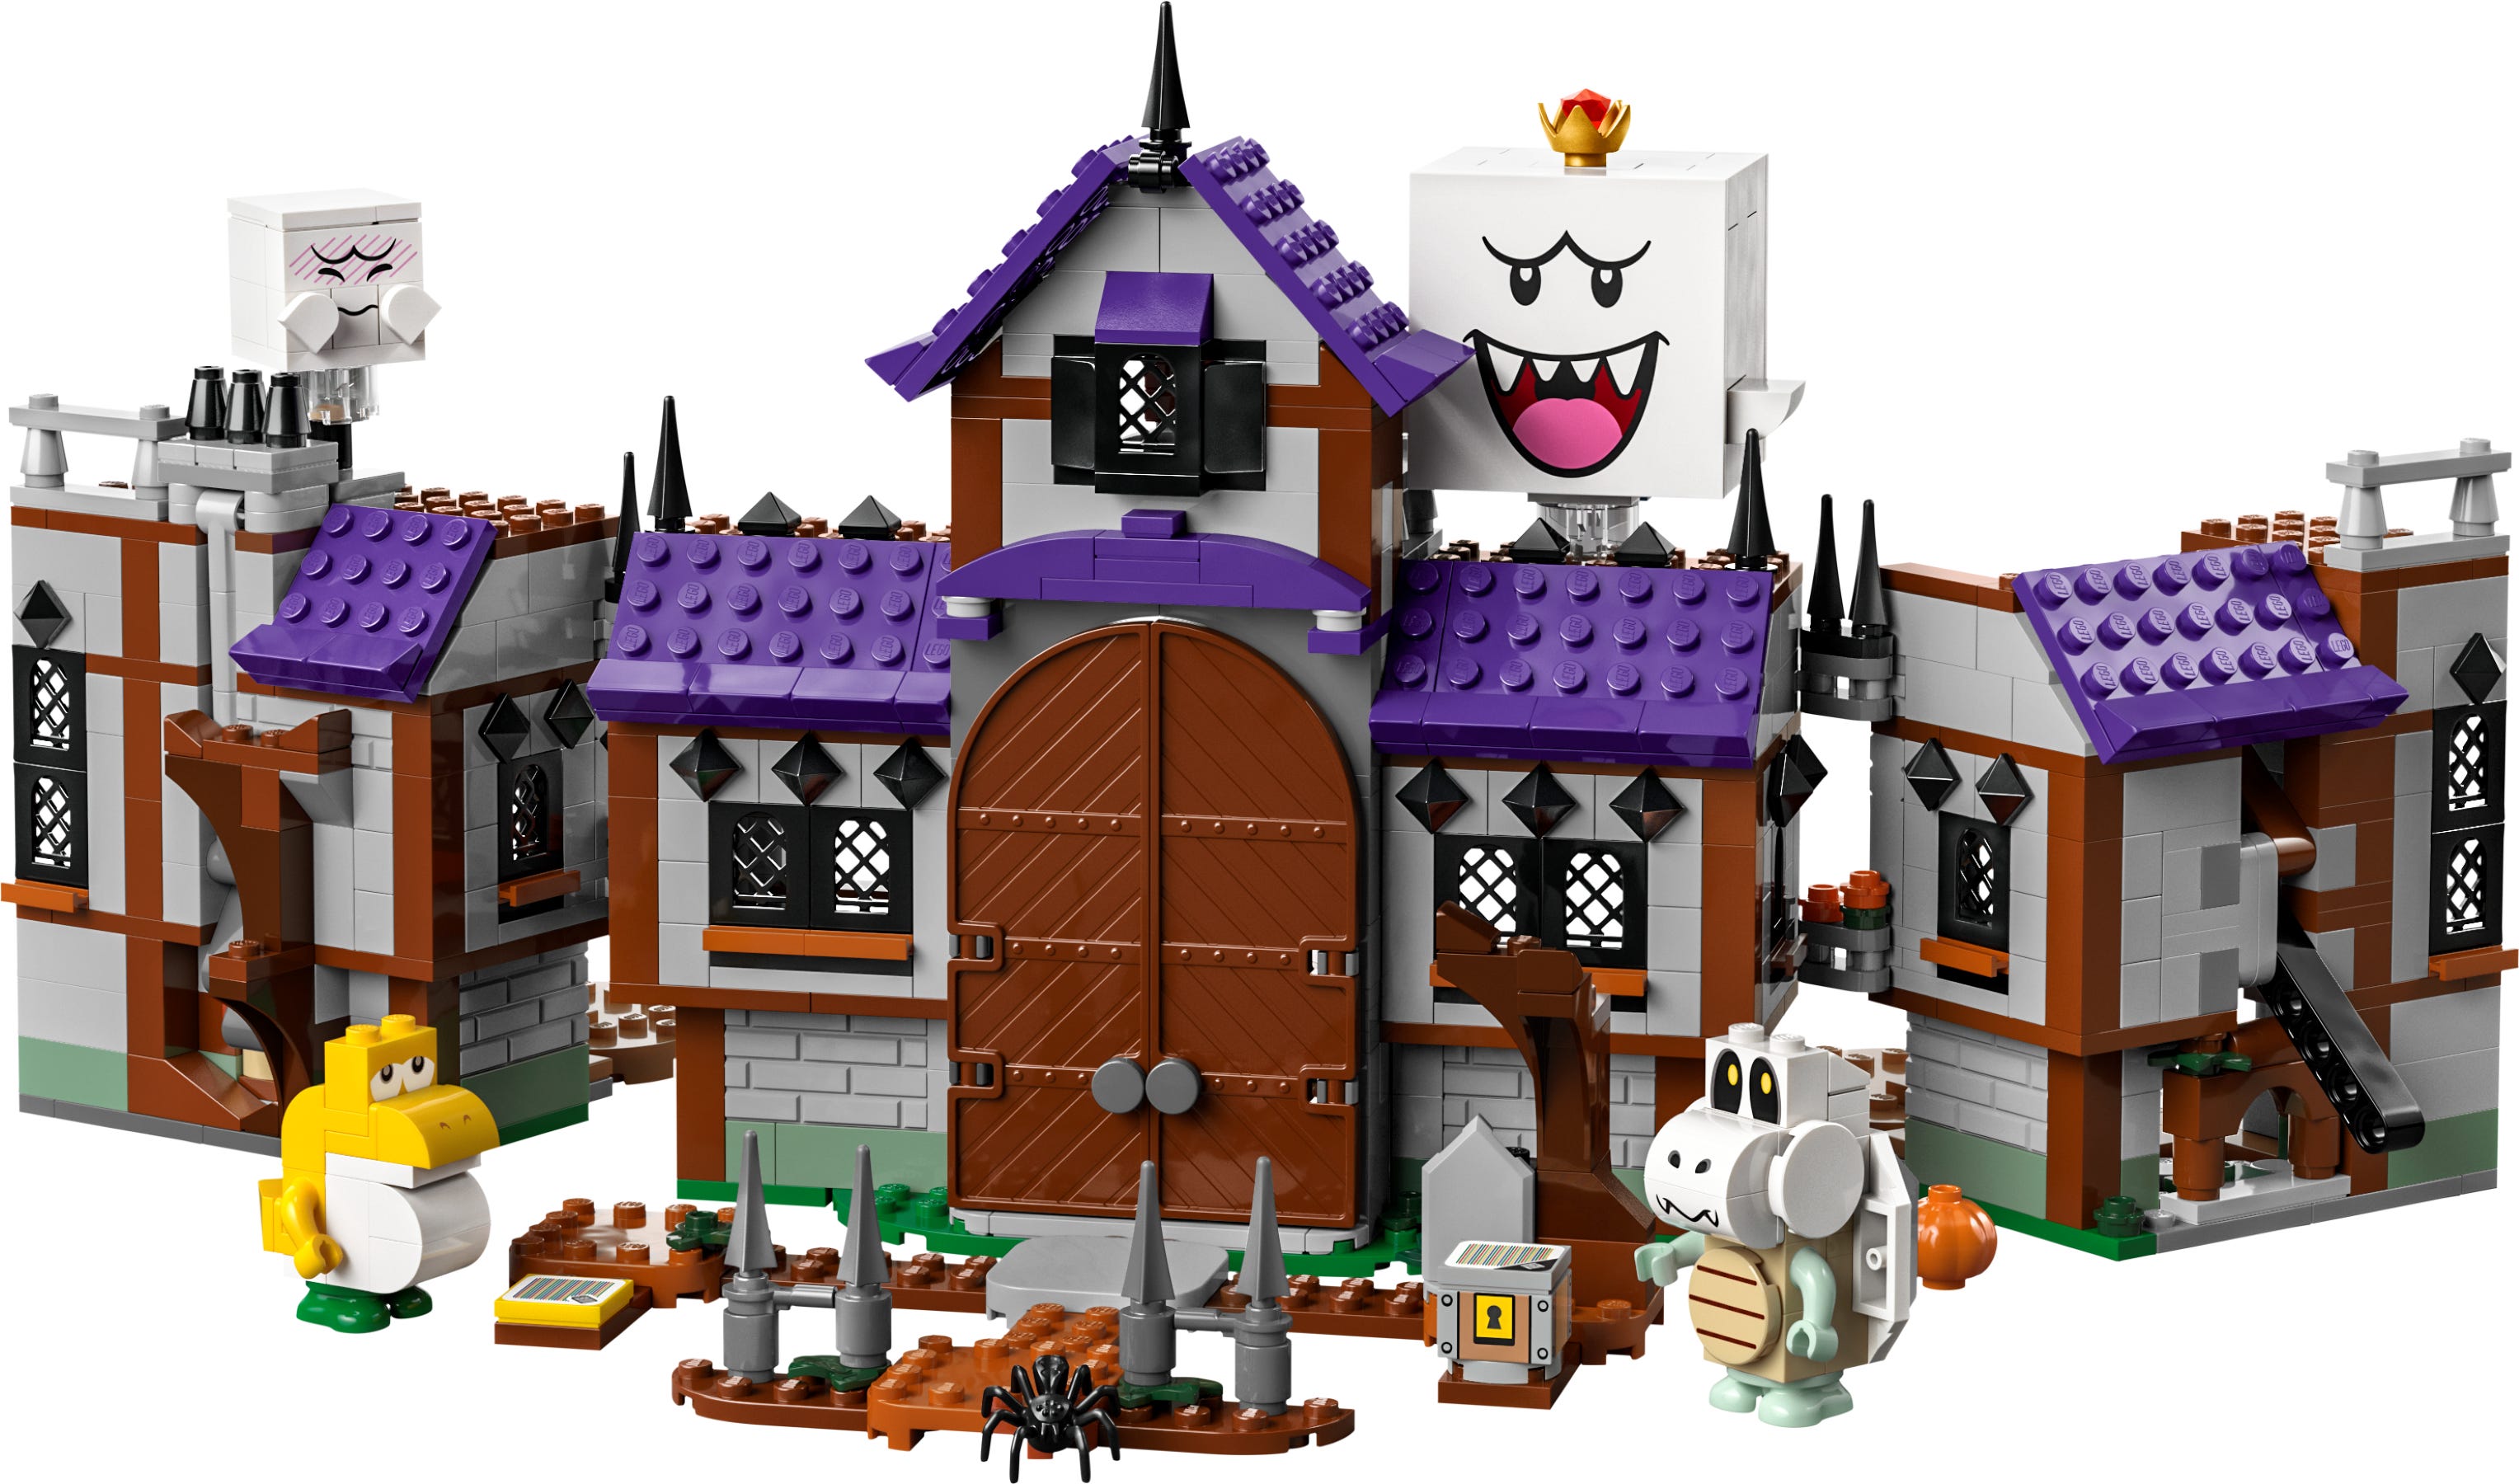 LEGO King Boo's spookhuis